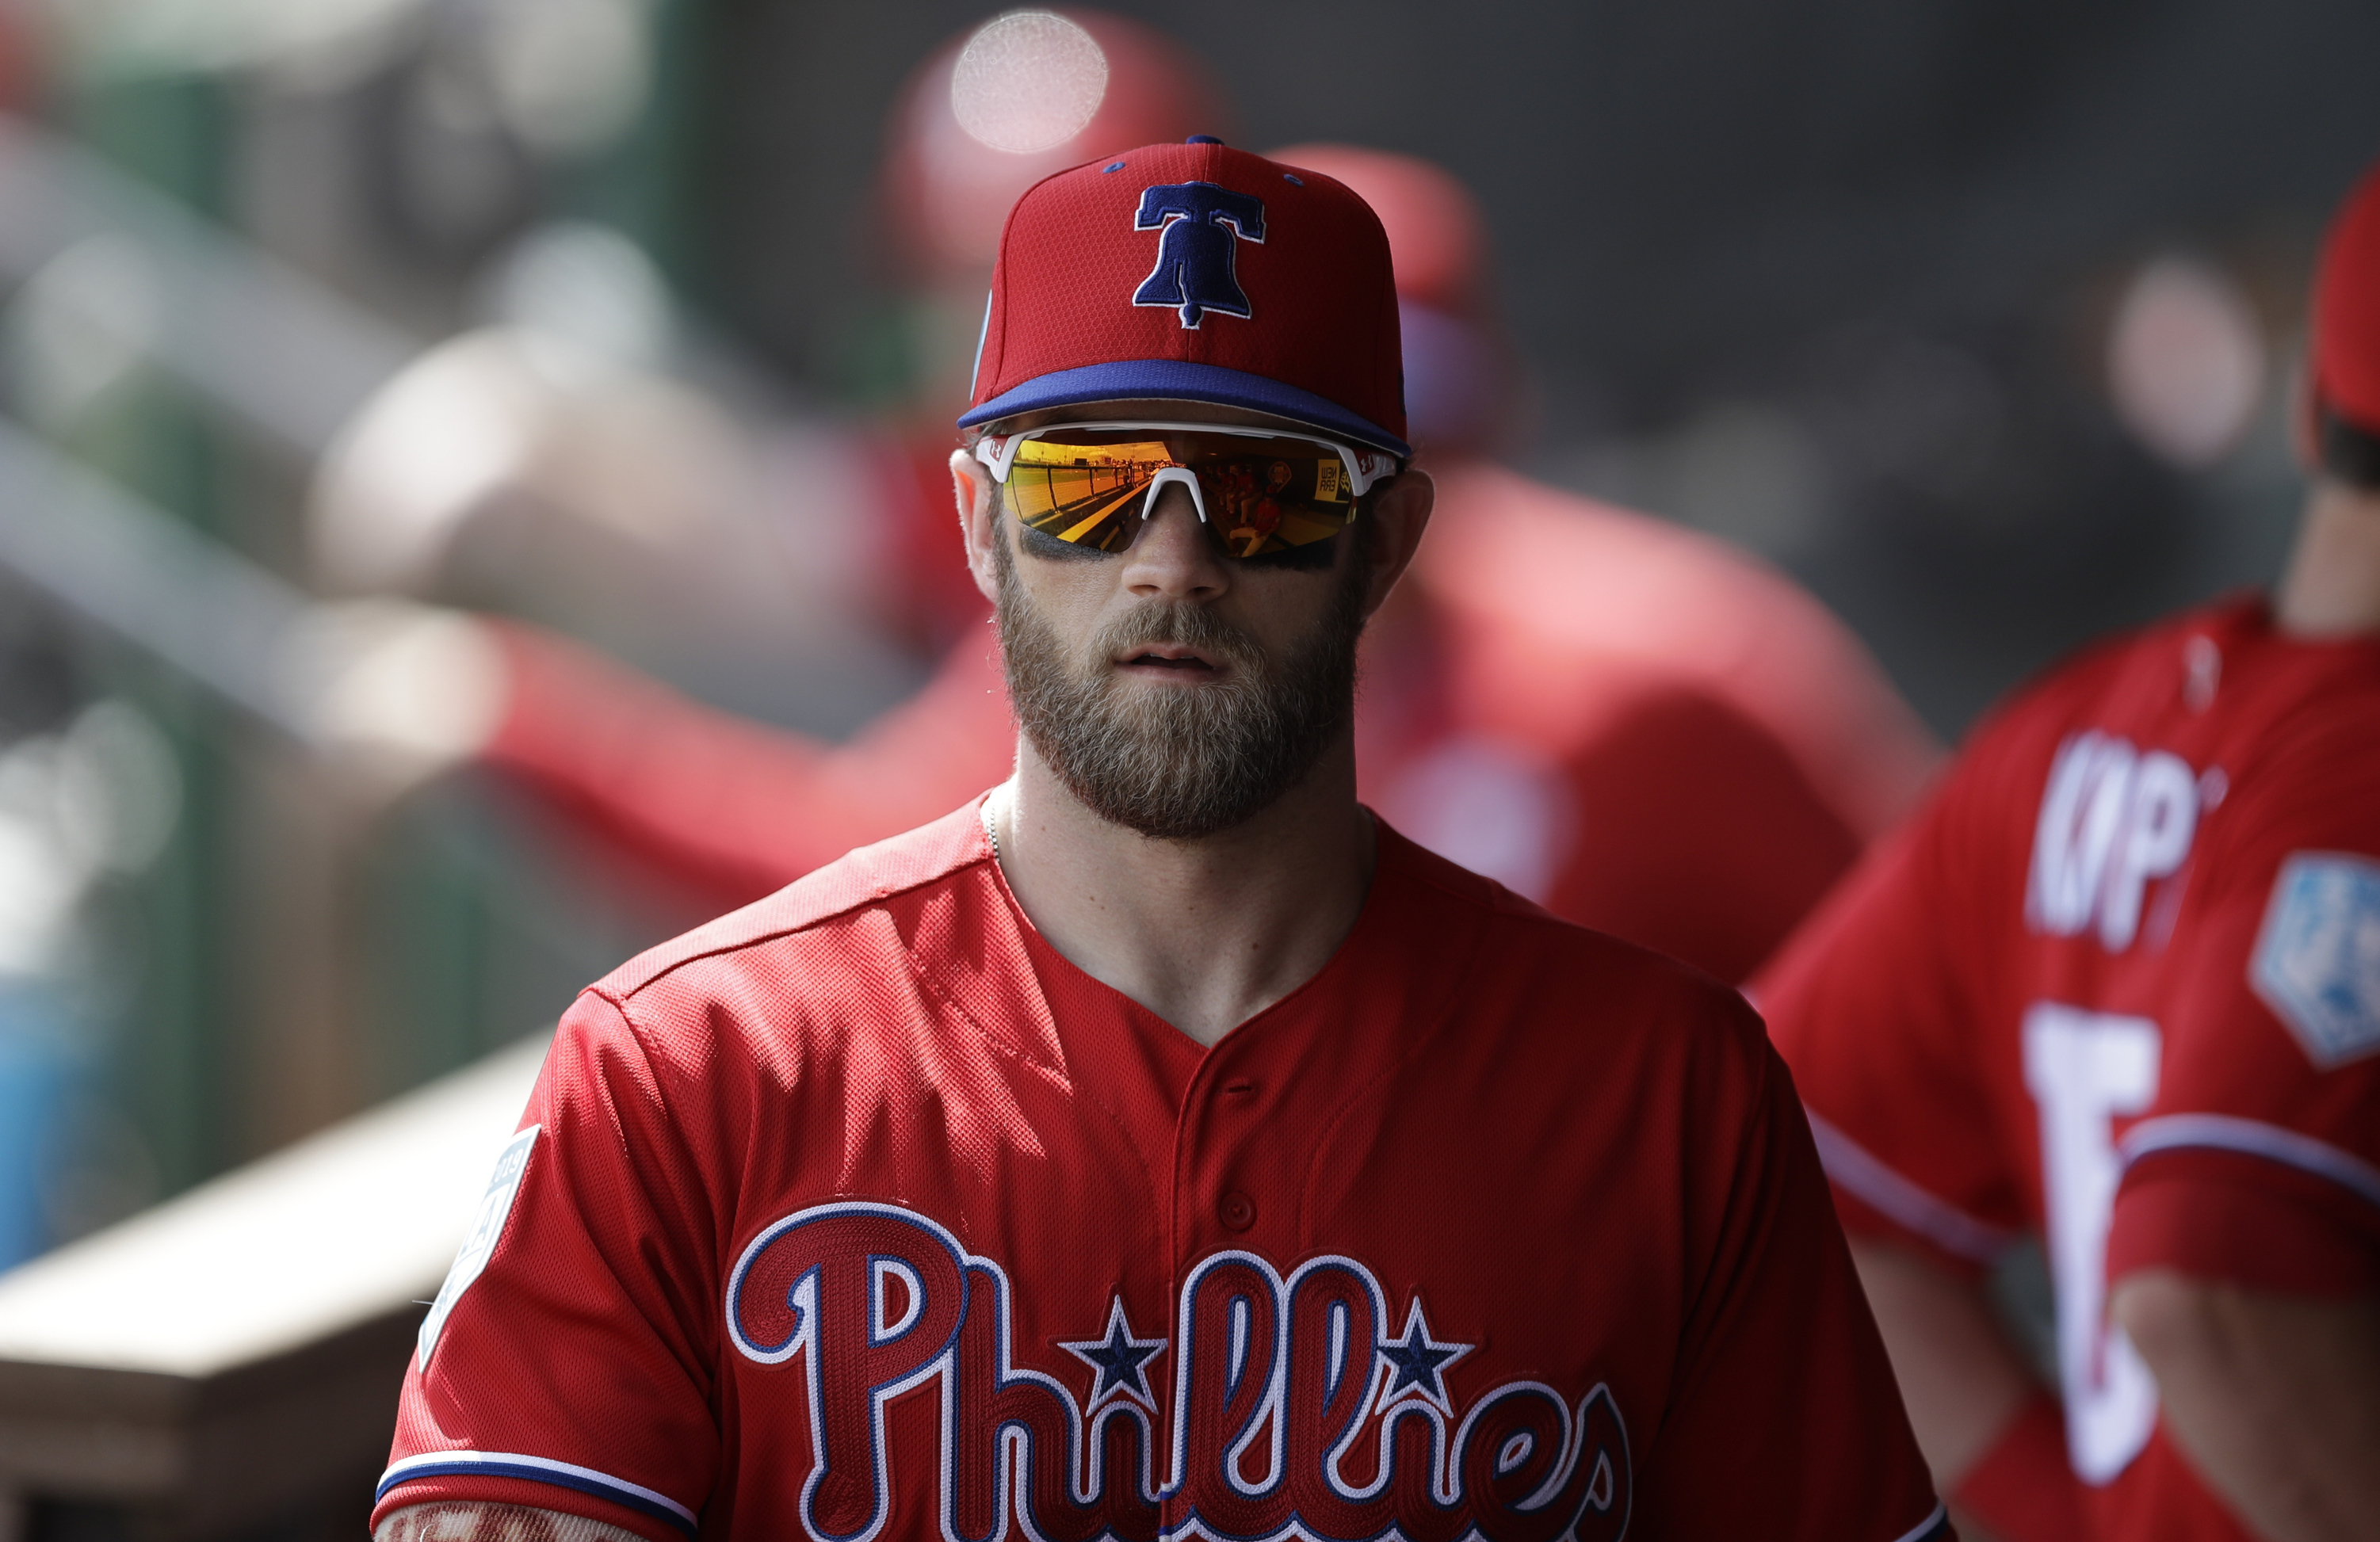 Bryce Harper aims to deliver a World Series title in Philly